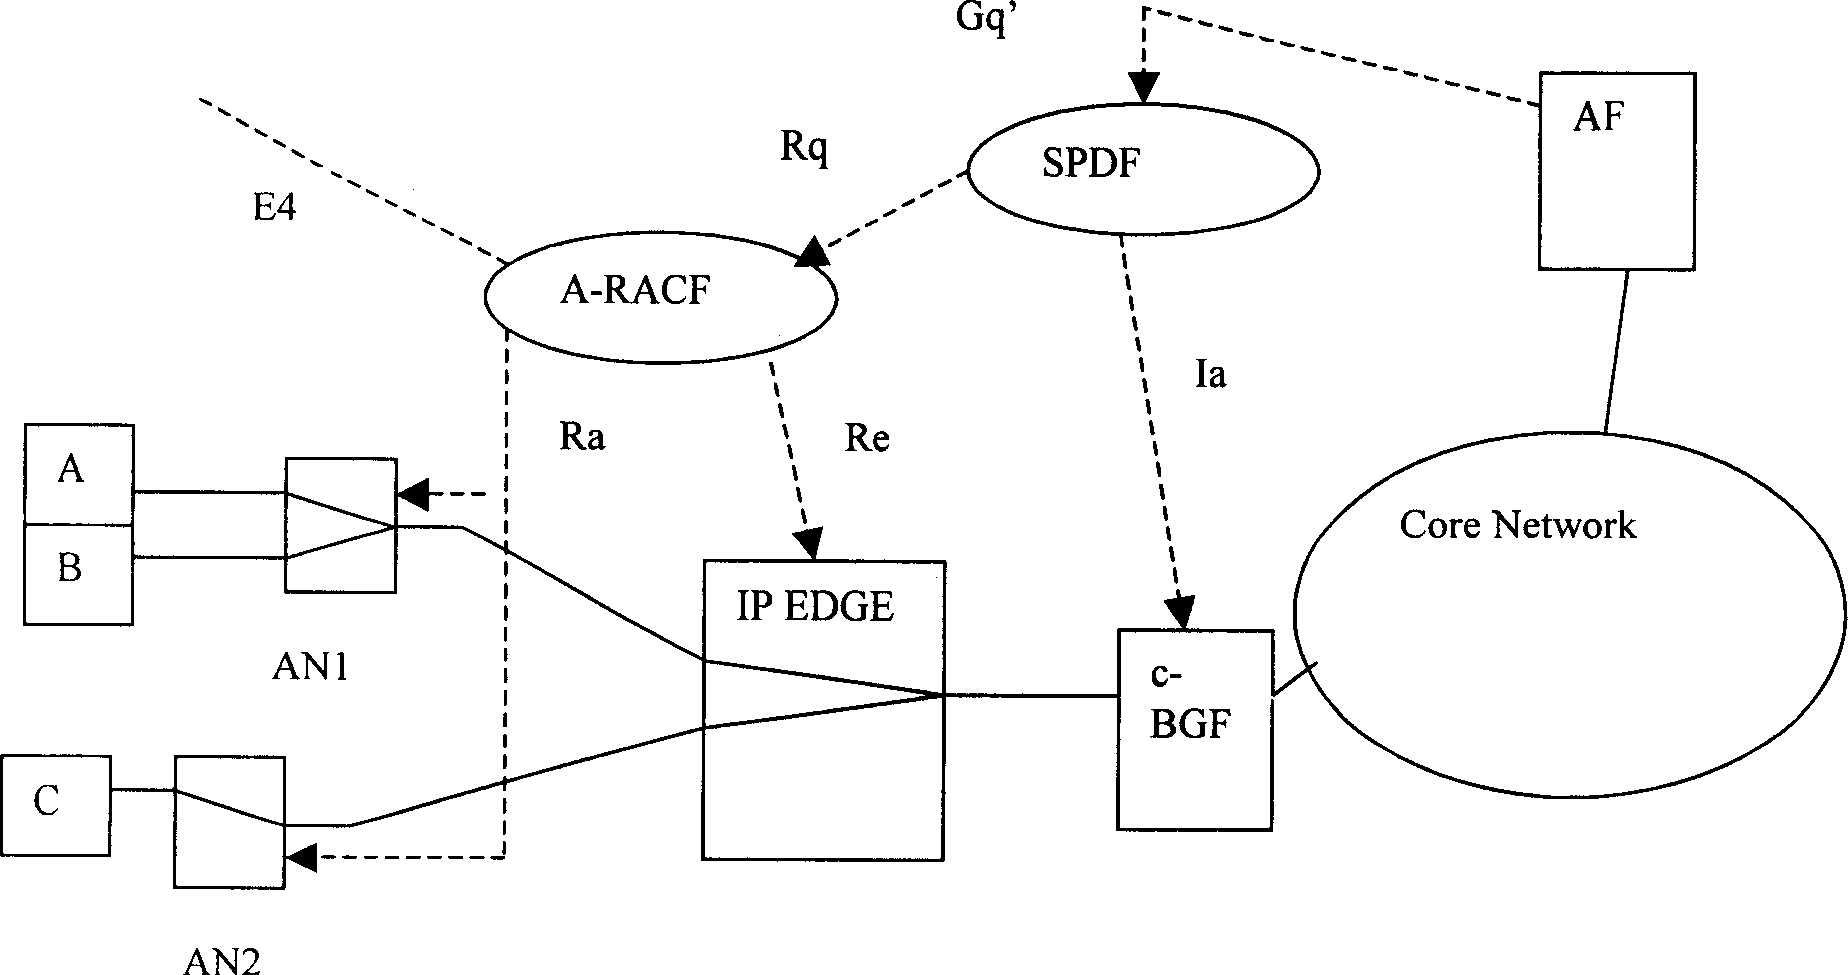 Method of implementing a set of specific stream QoS control